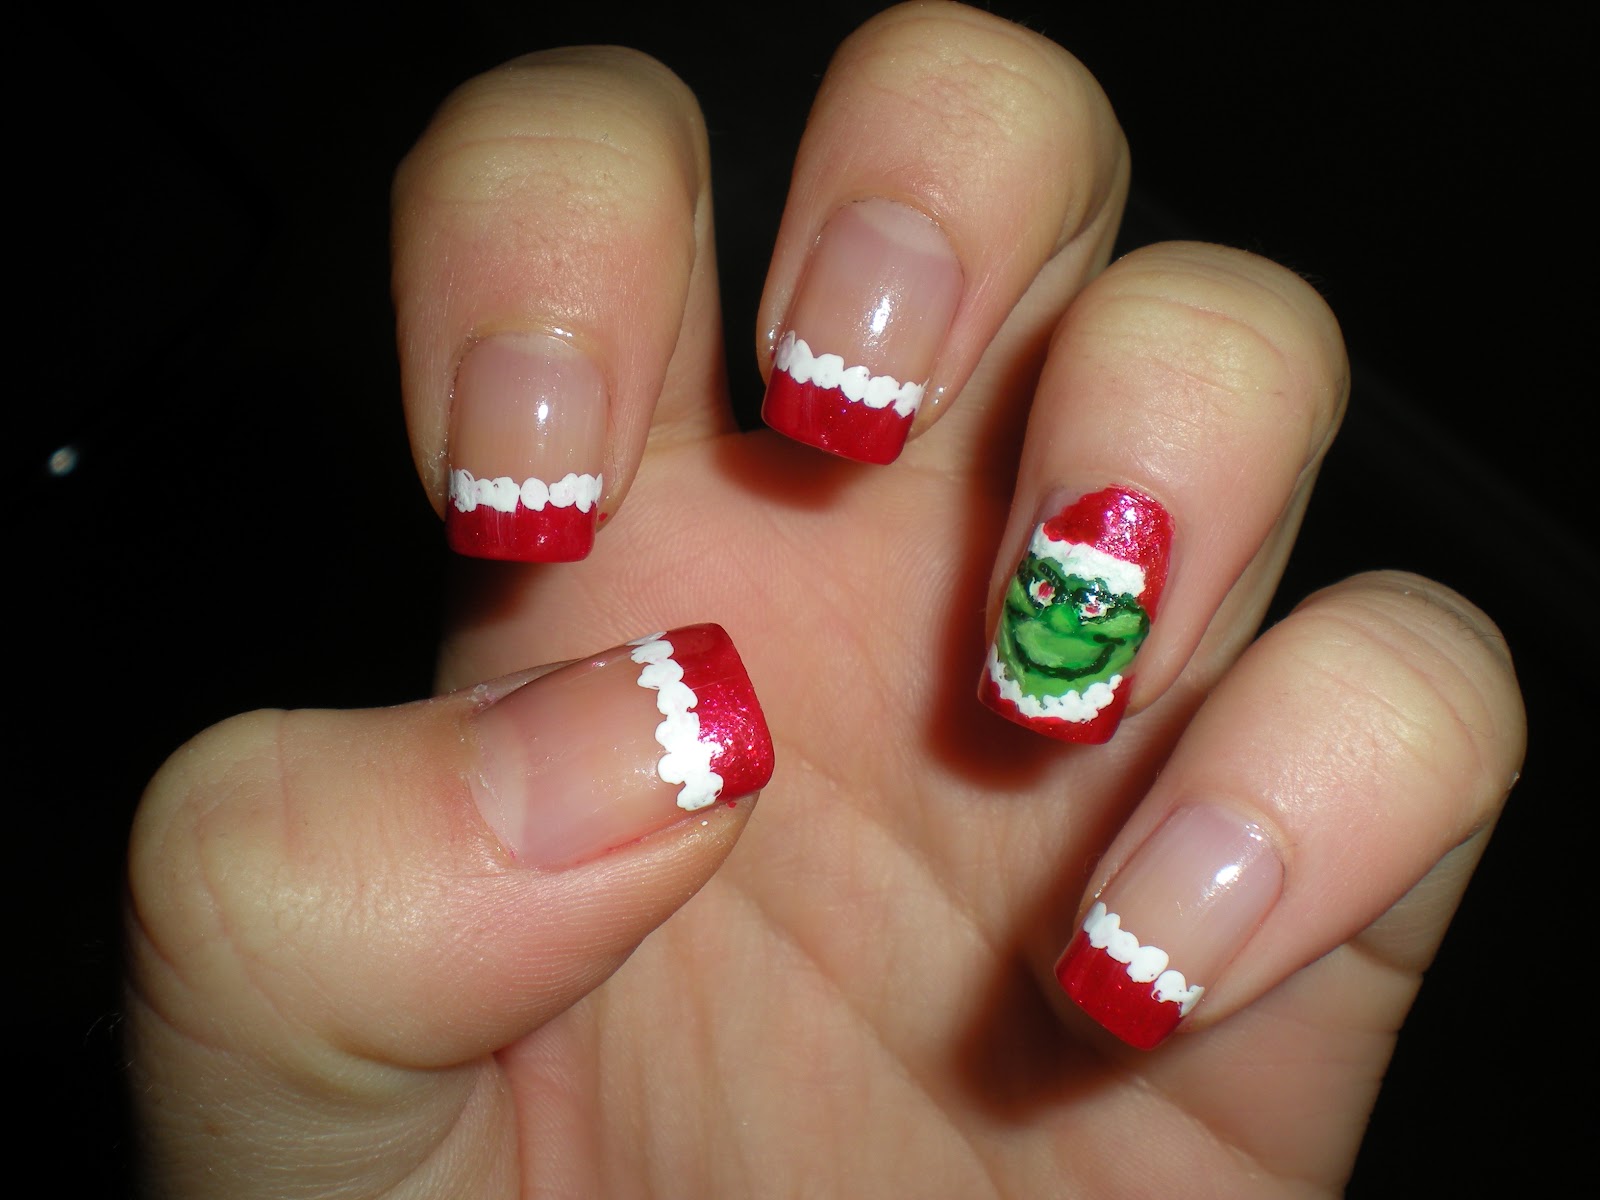 3. "The Grinch" Inspired Nail Designs - wide 3